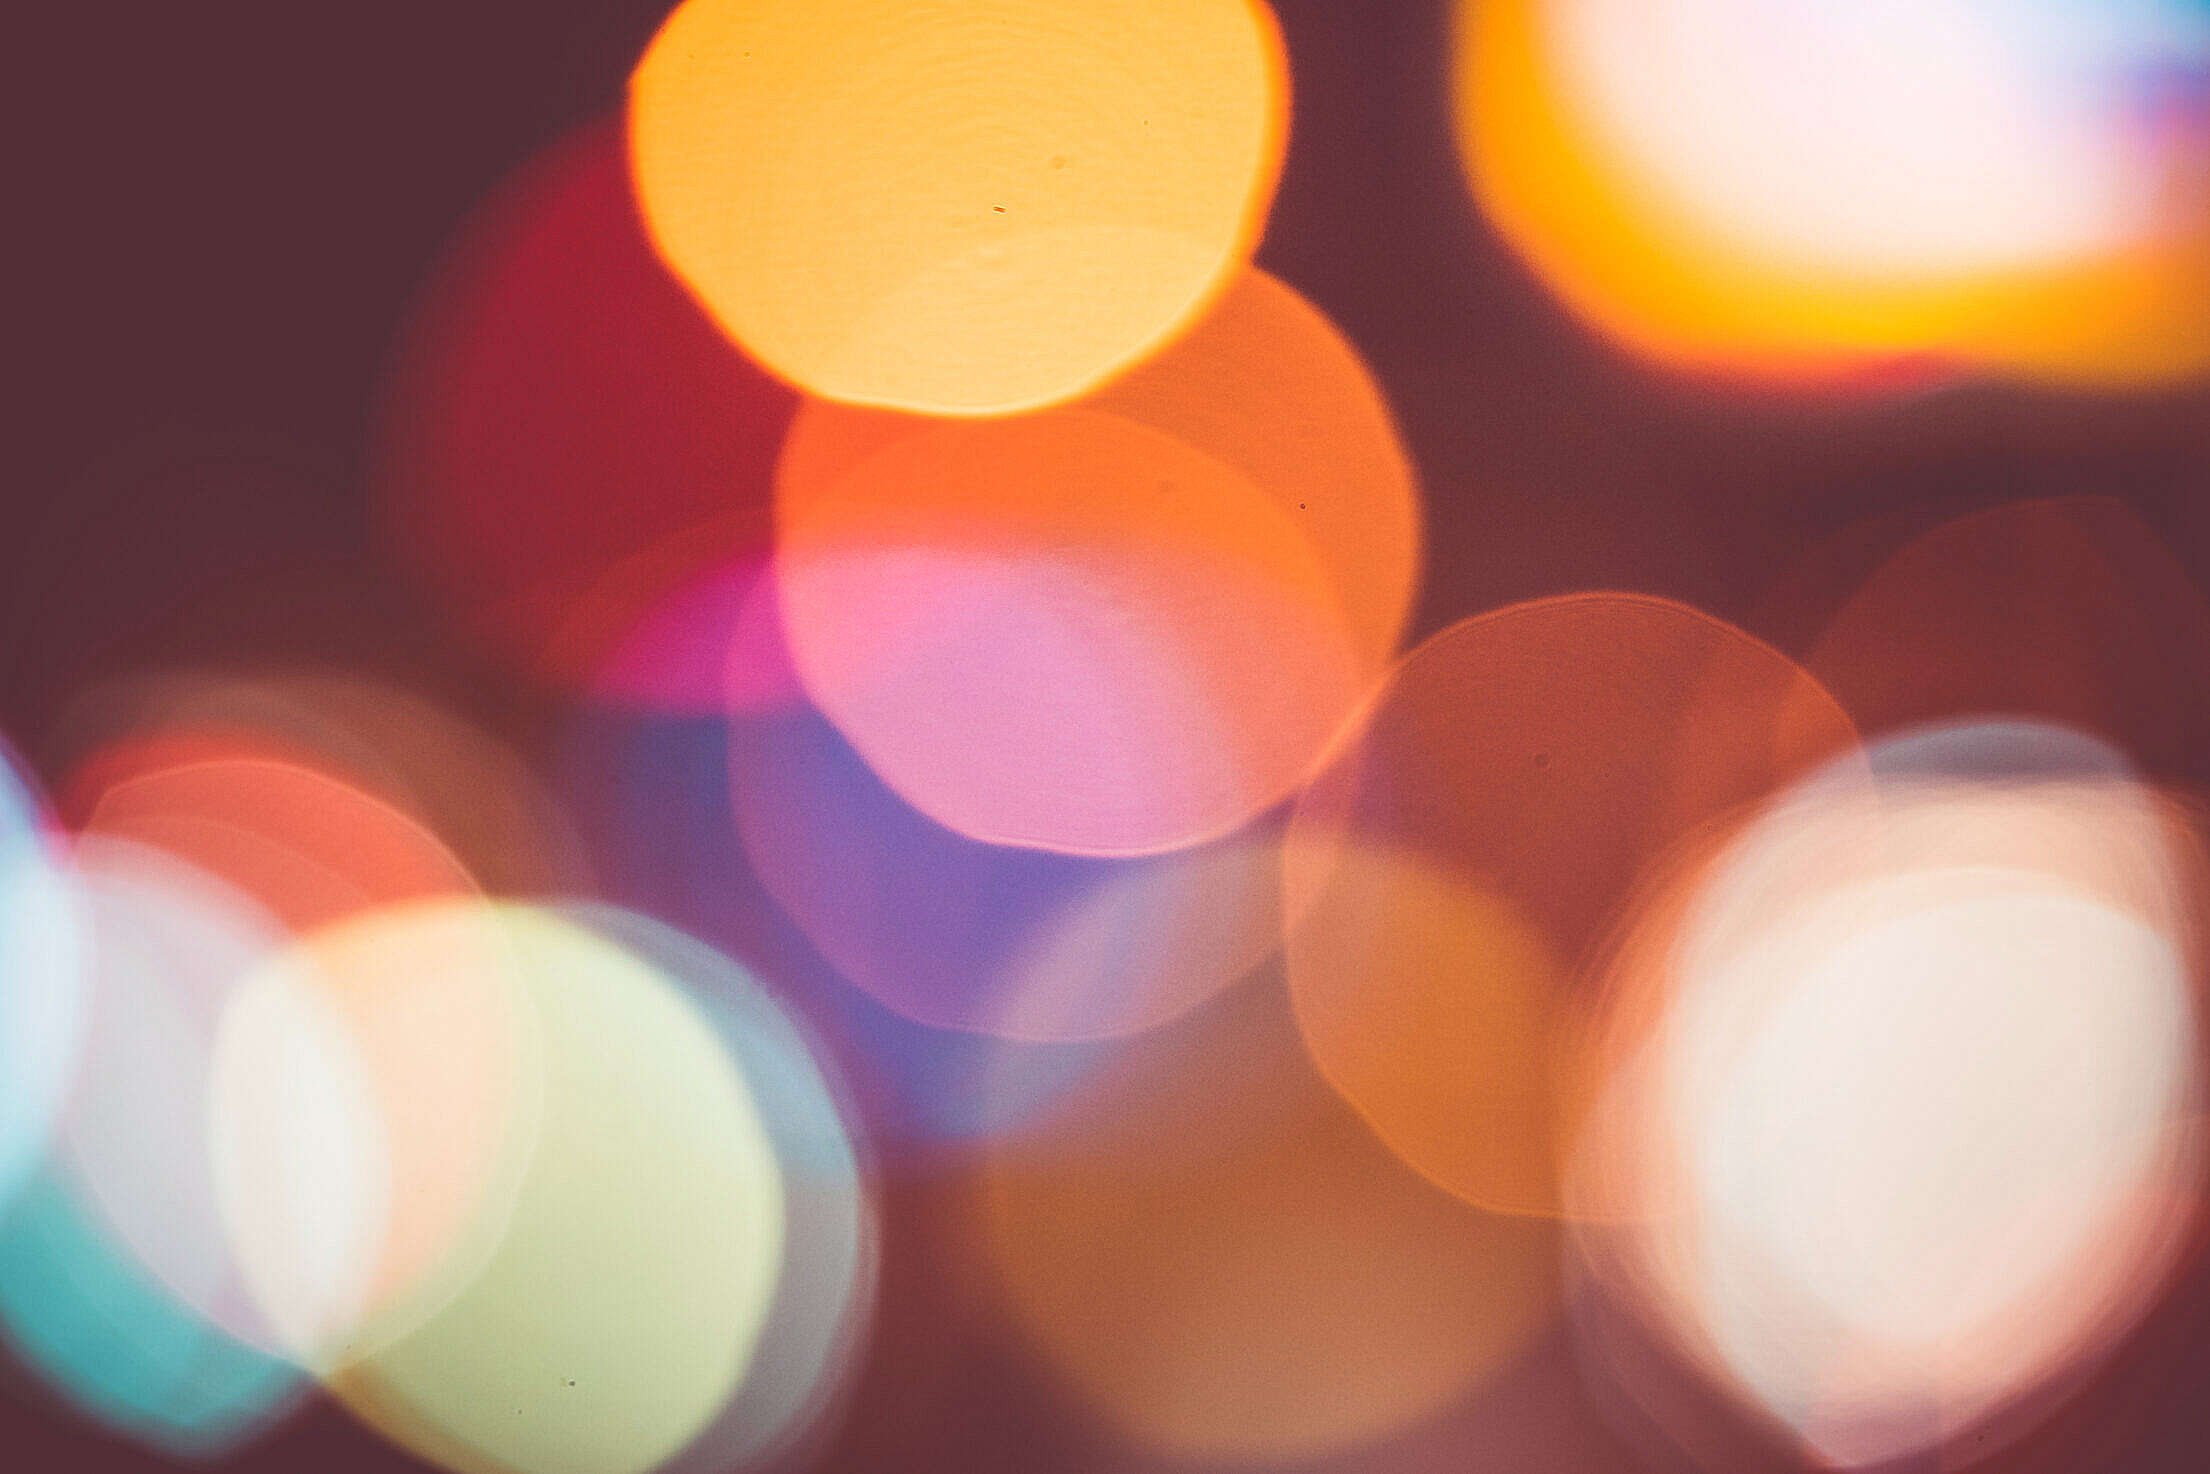 Big and Real Light Abtract Colorful Bokeh Background Free Stock Photo